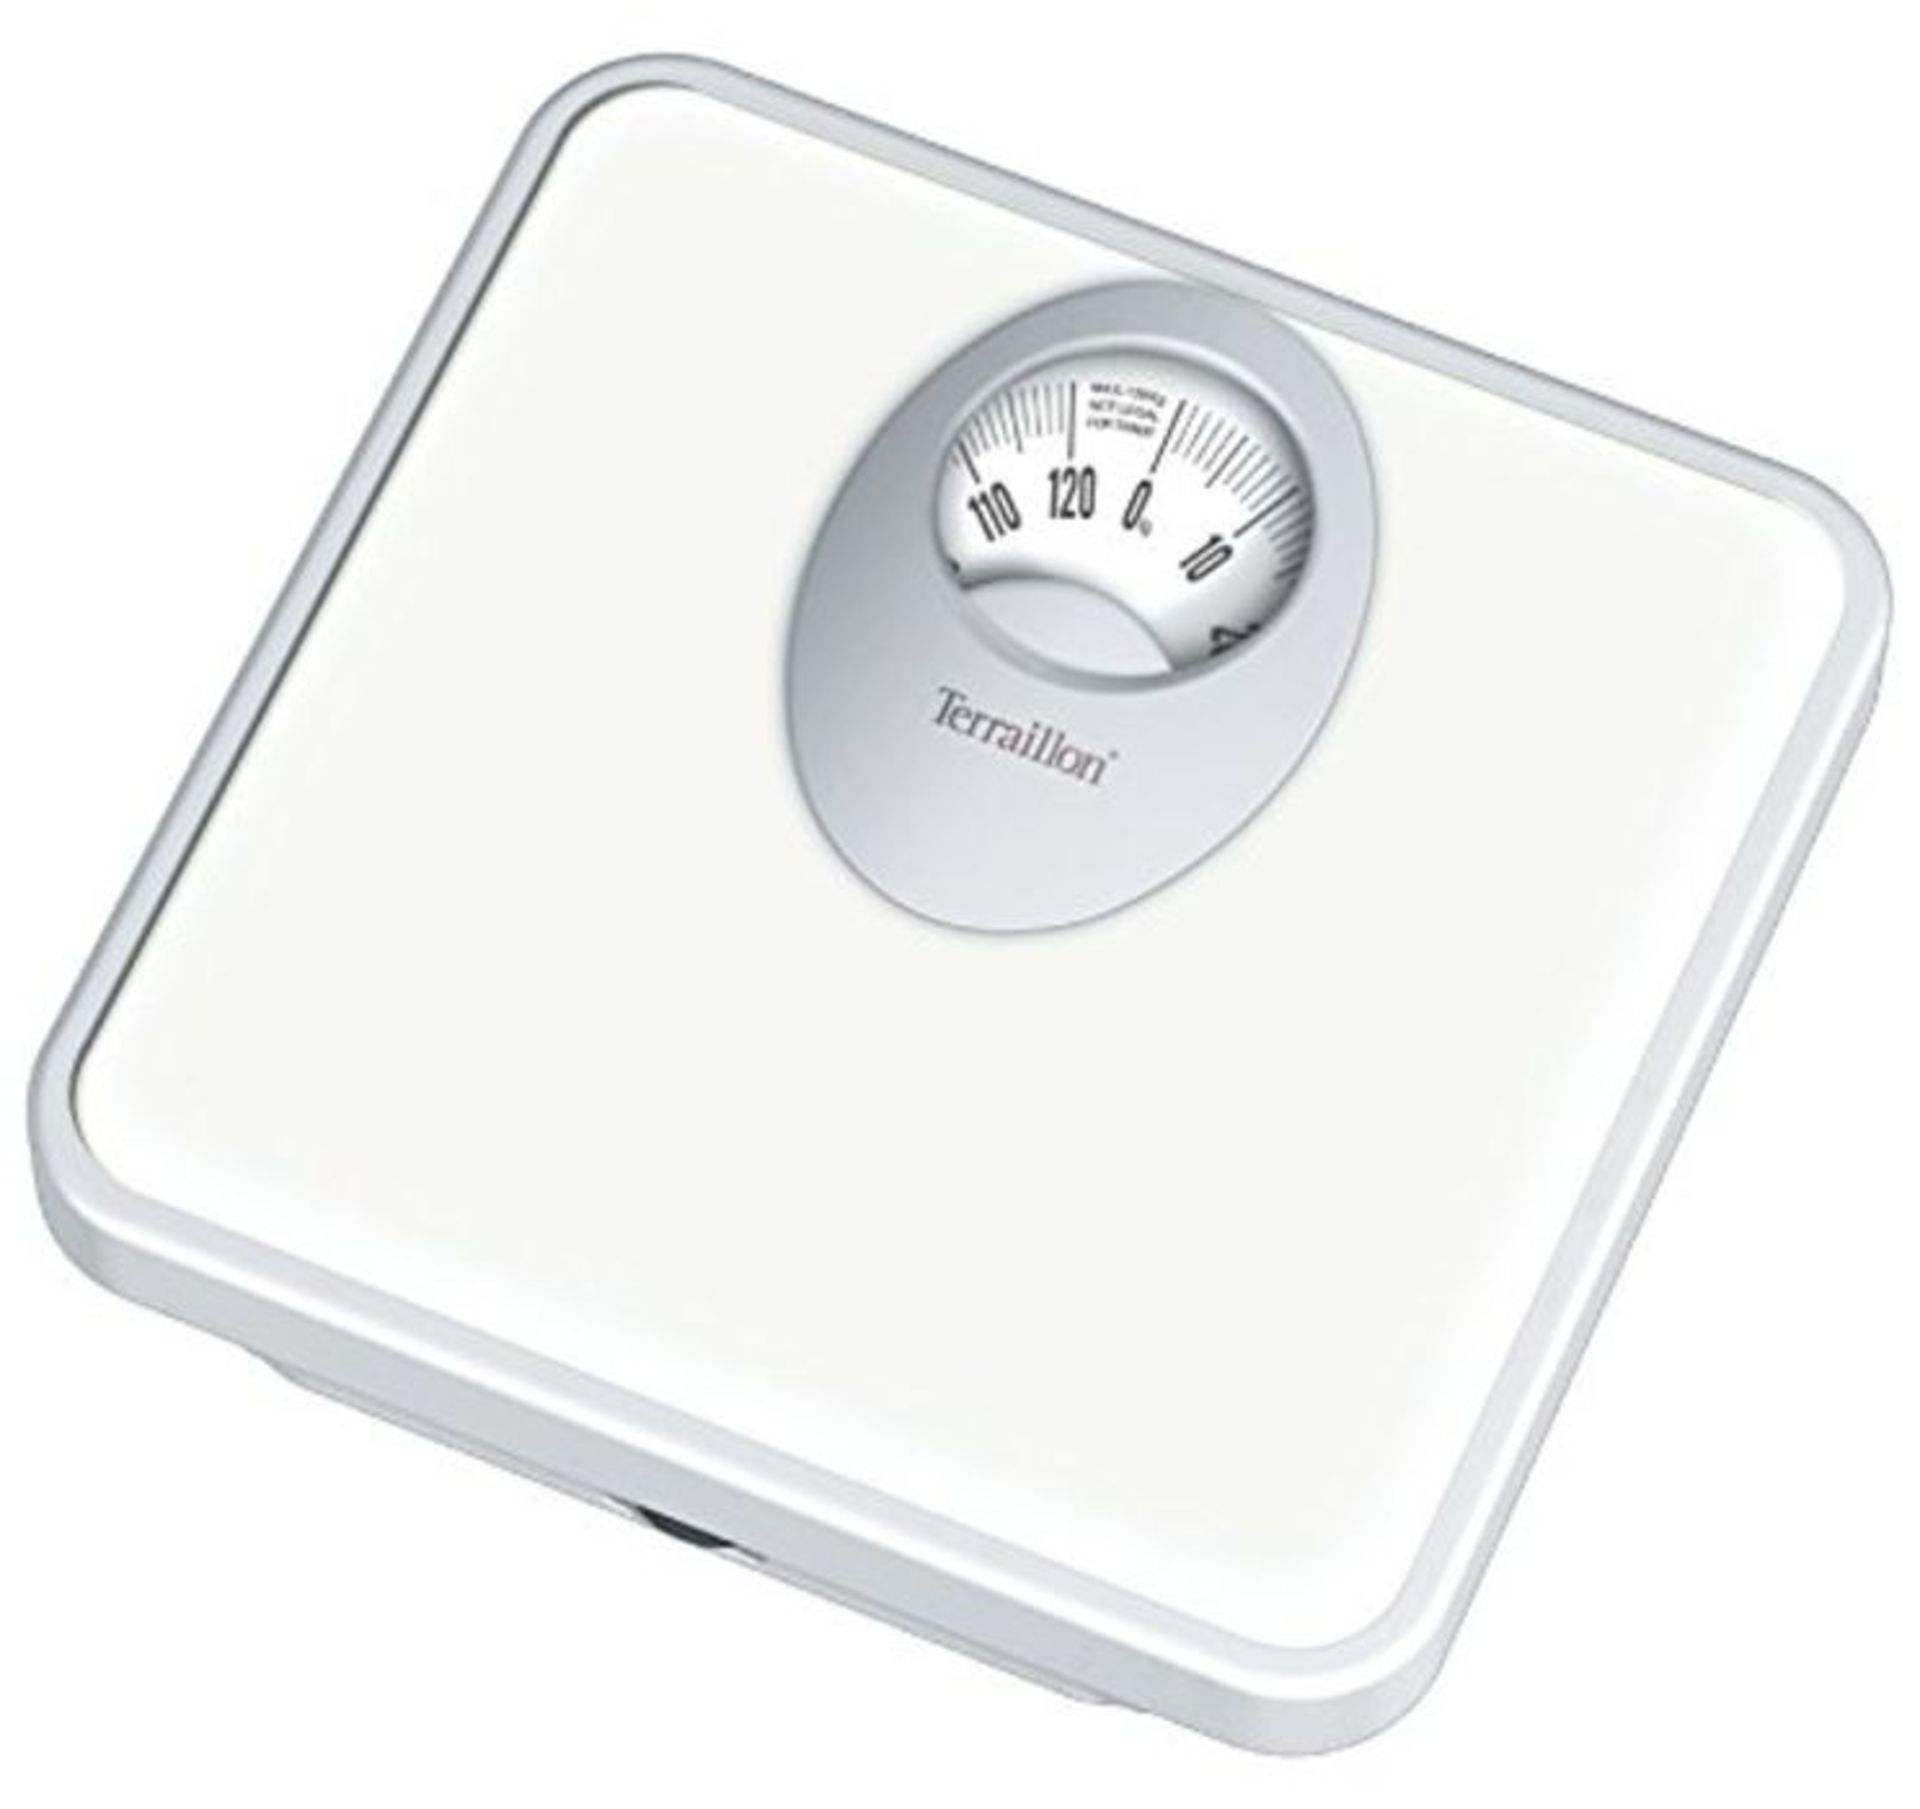 [CRACKED] Terraillon Mechanical Bathroom Scales, Large Display